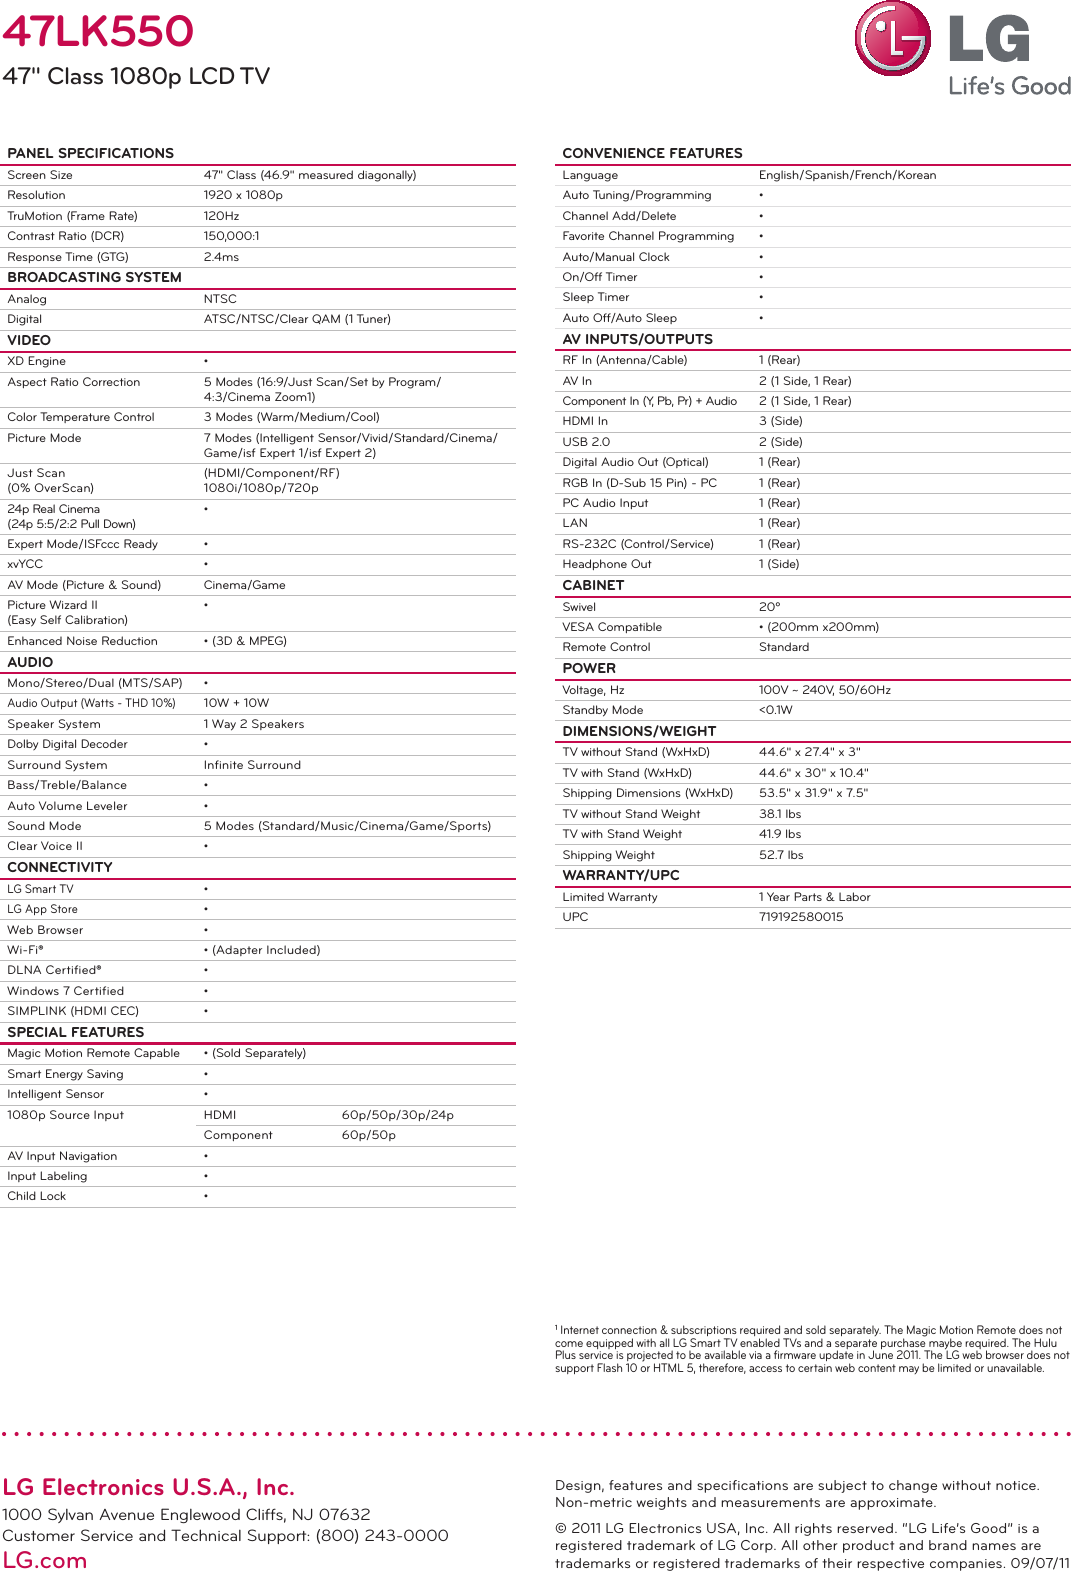 Page 2 of 2 - LG 47LK550 User Manual Specification Television Spec Sheet